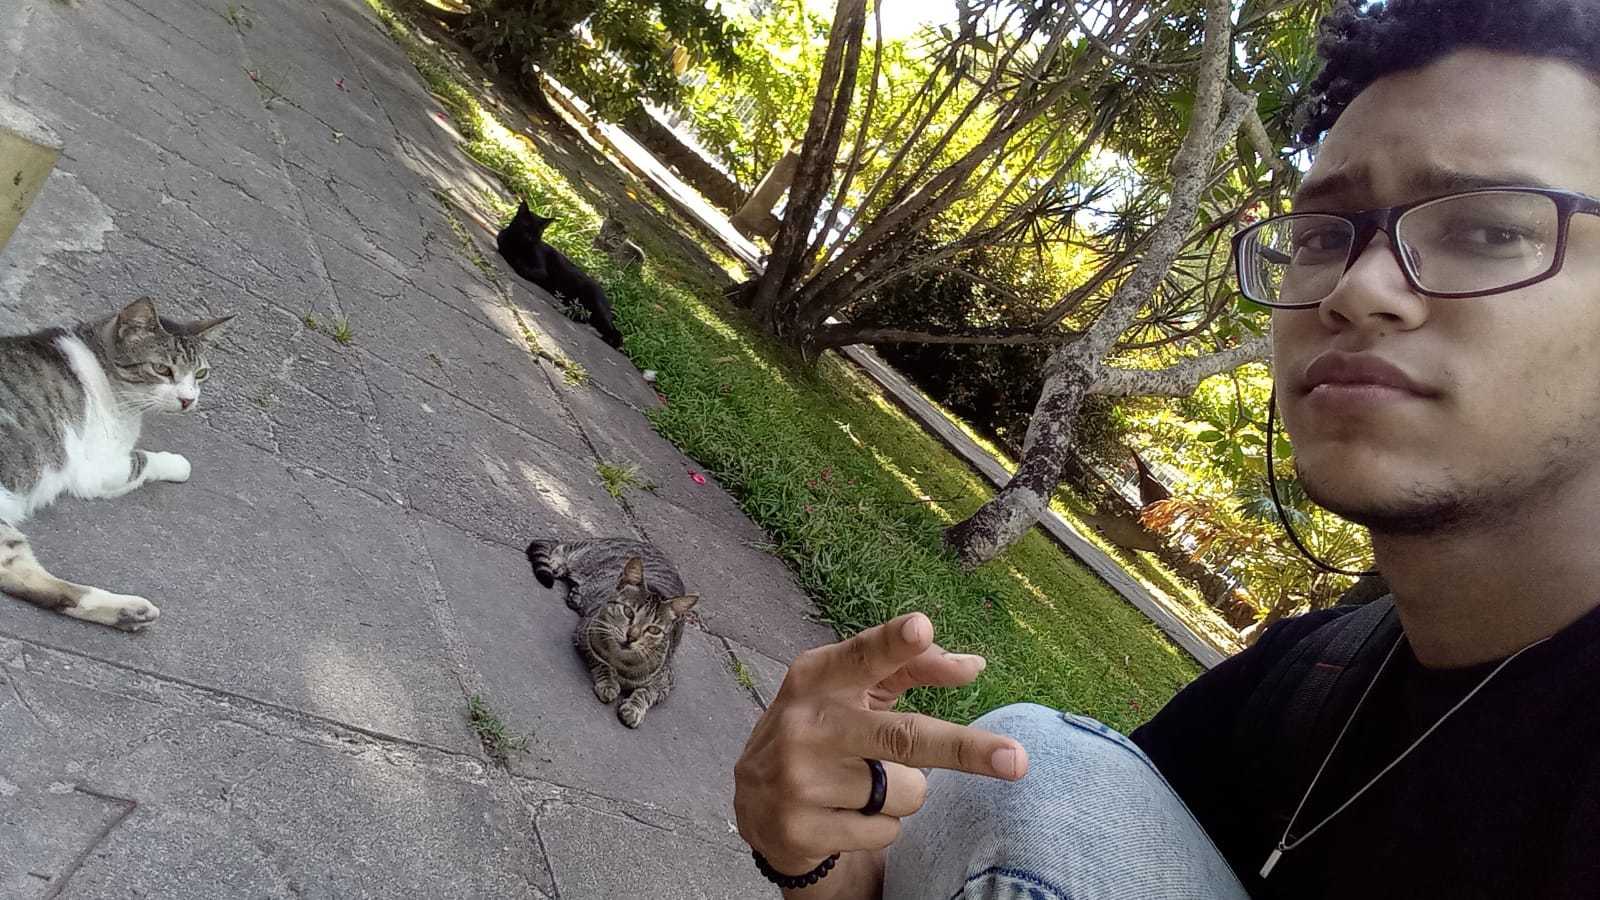 me and some cats